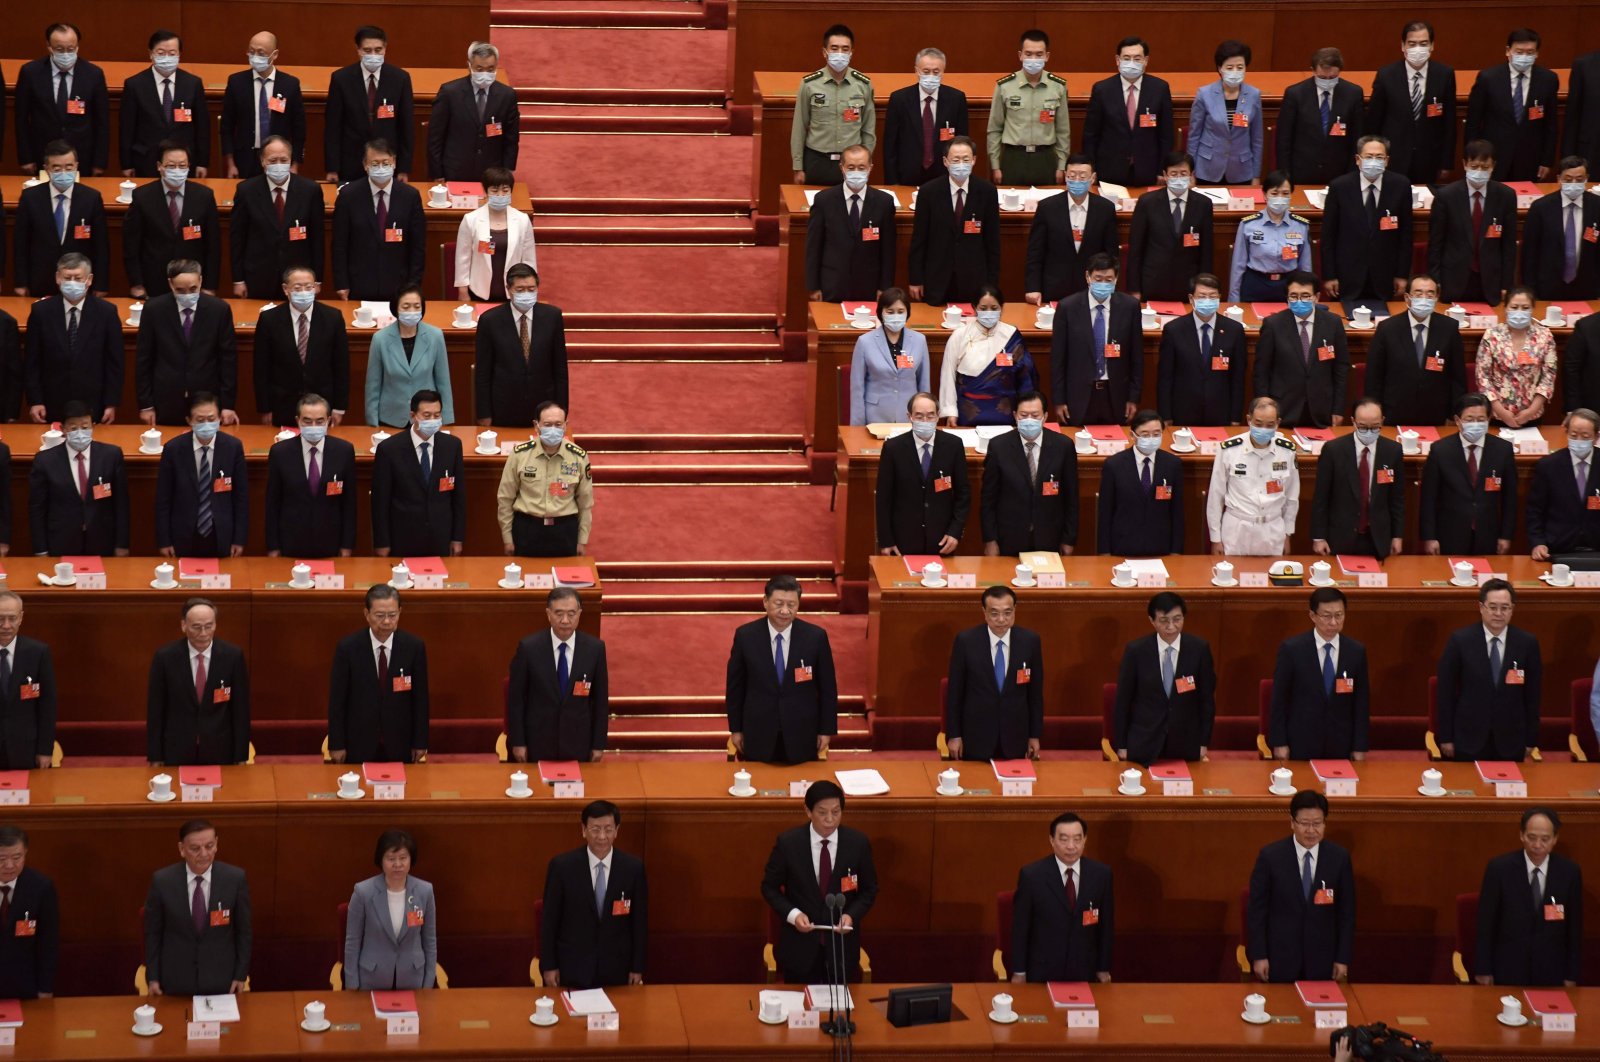 Chinese President Xi Jinping (C) stands with other Chinese leaders at the end of the closing session of the National People's Congress at the Great Hall of the People, Beijing, May 28, 2020. (AFP Photo)